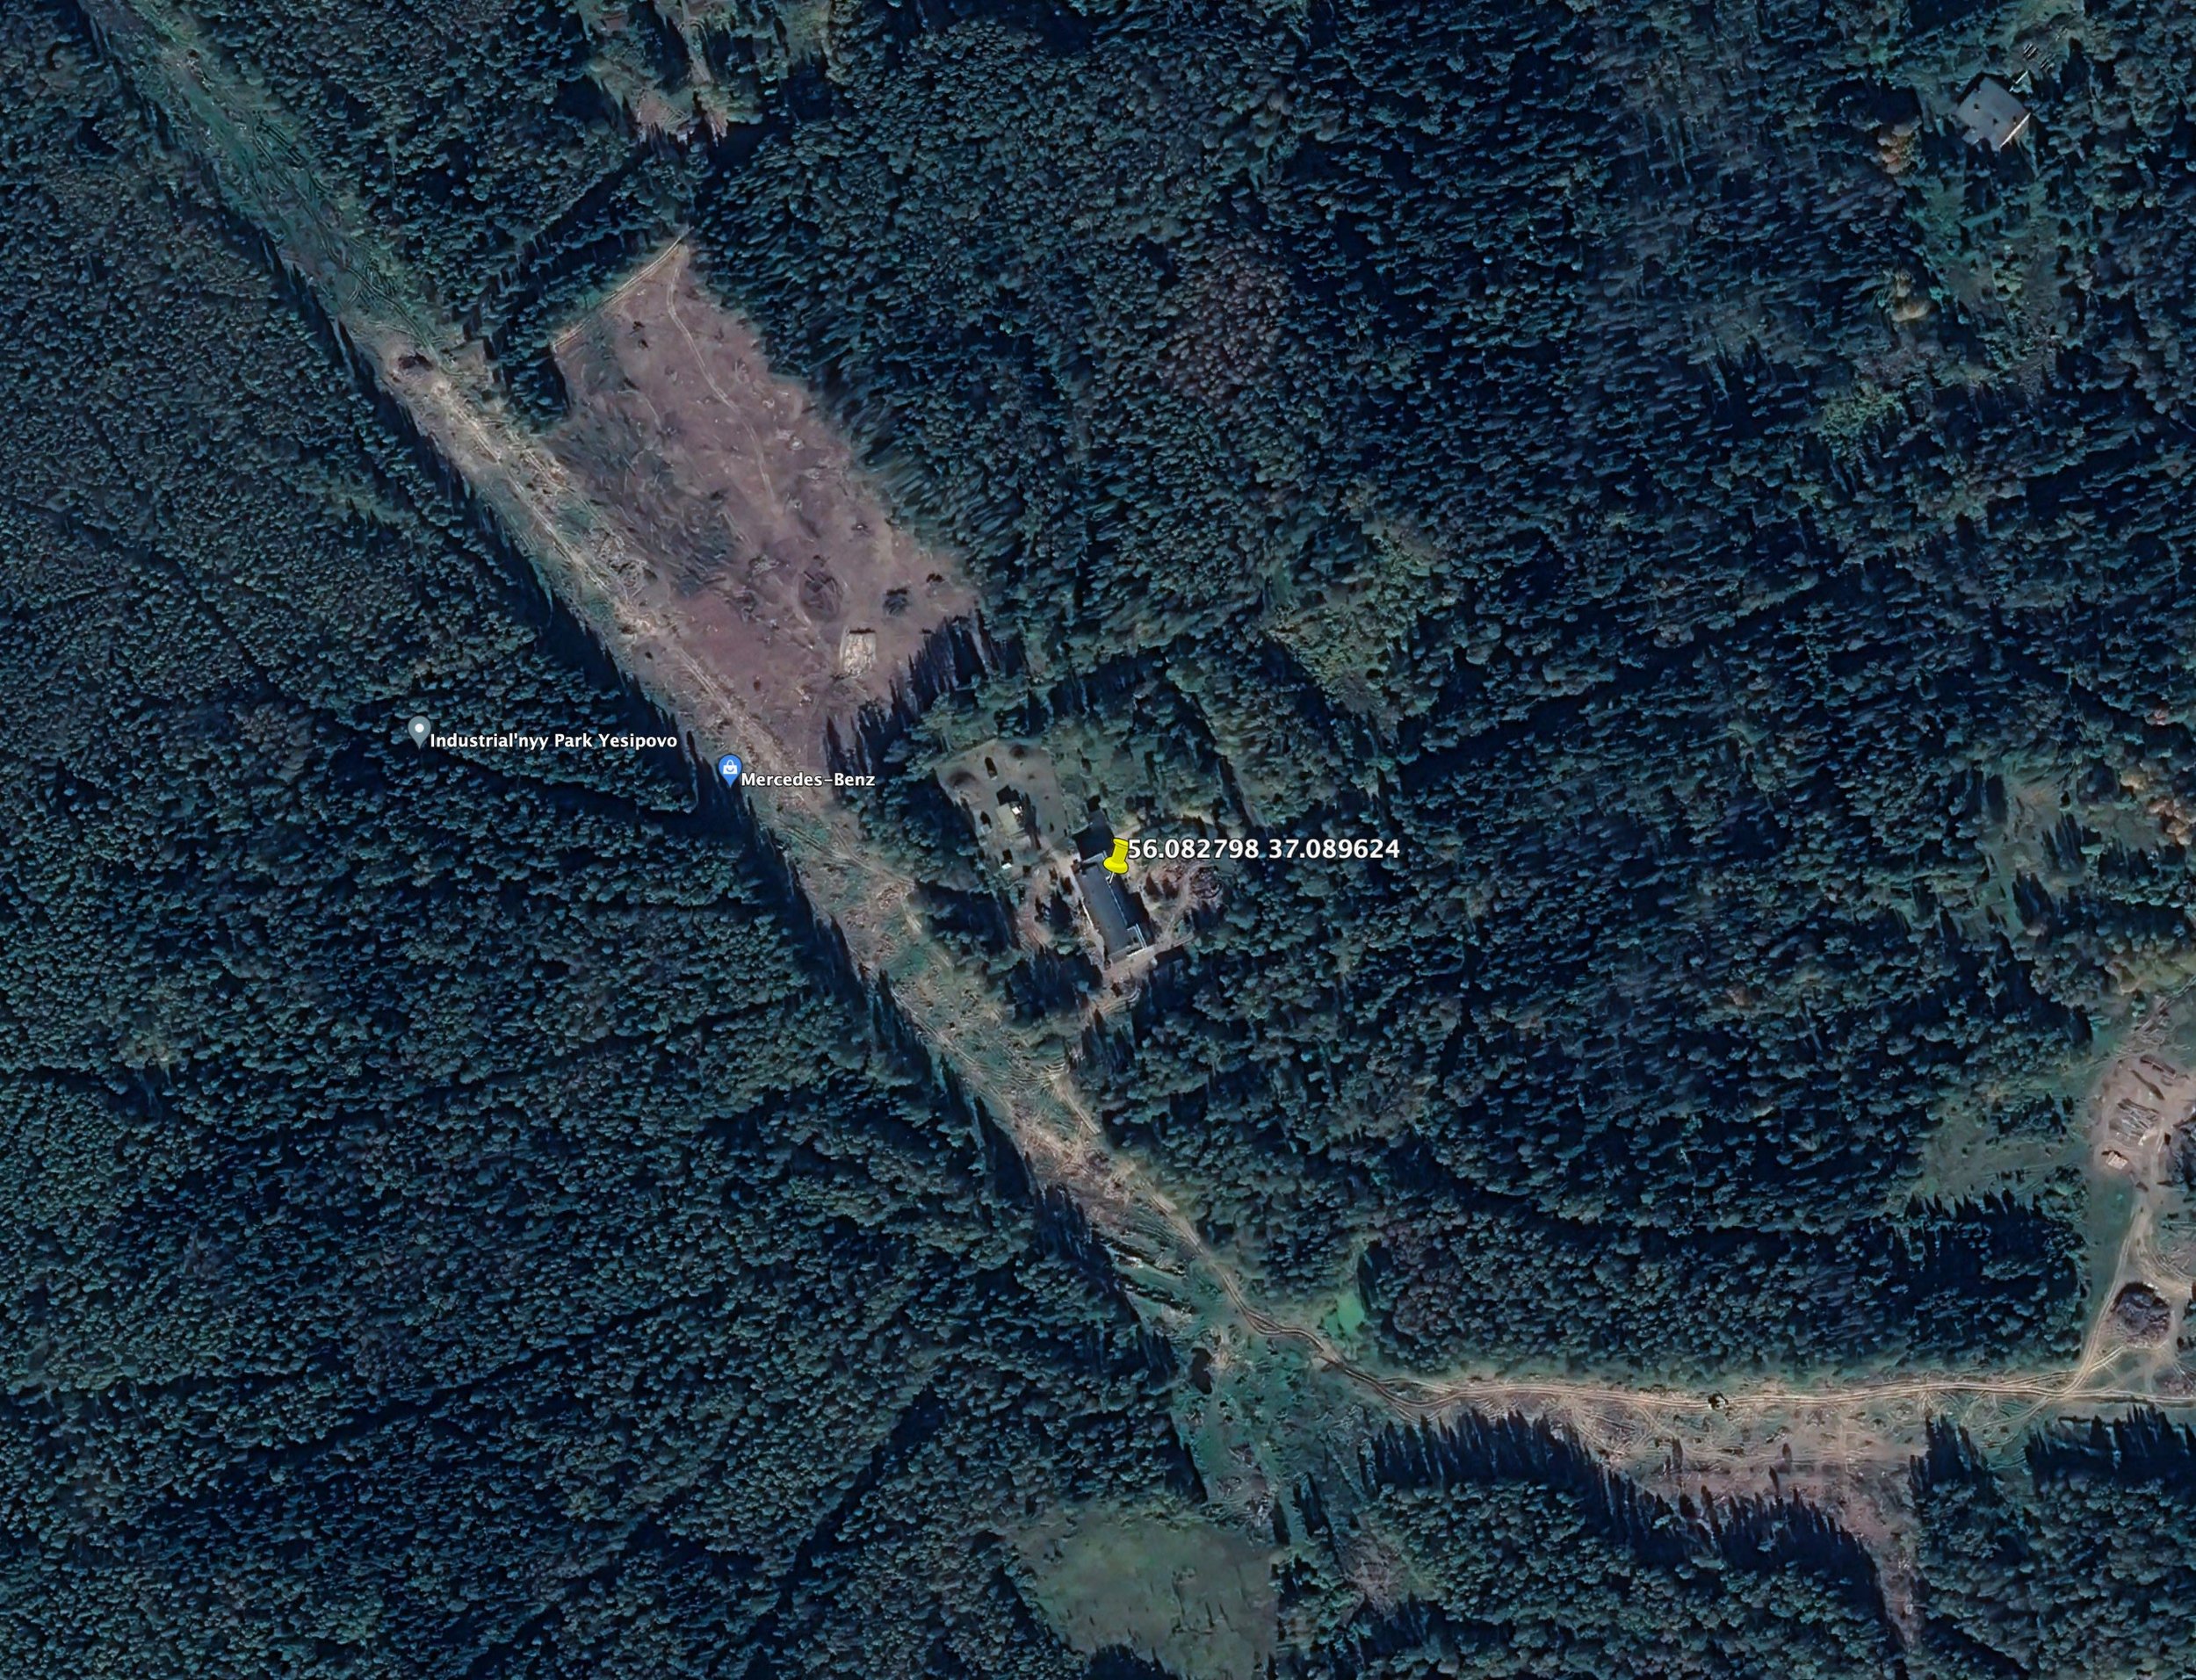  Suspected source location for the Russian Numbers Station known as UVB-76, at 56.082798, 37.089624 GPS coordinates, as of 2015 